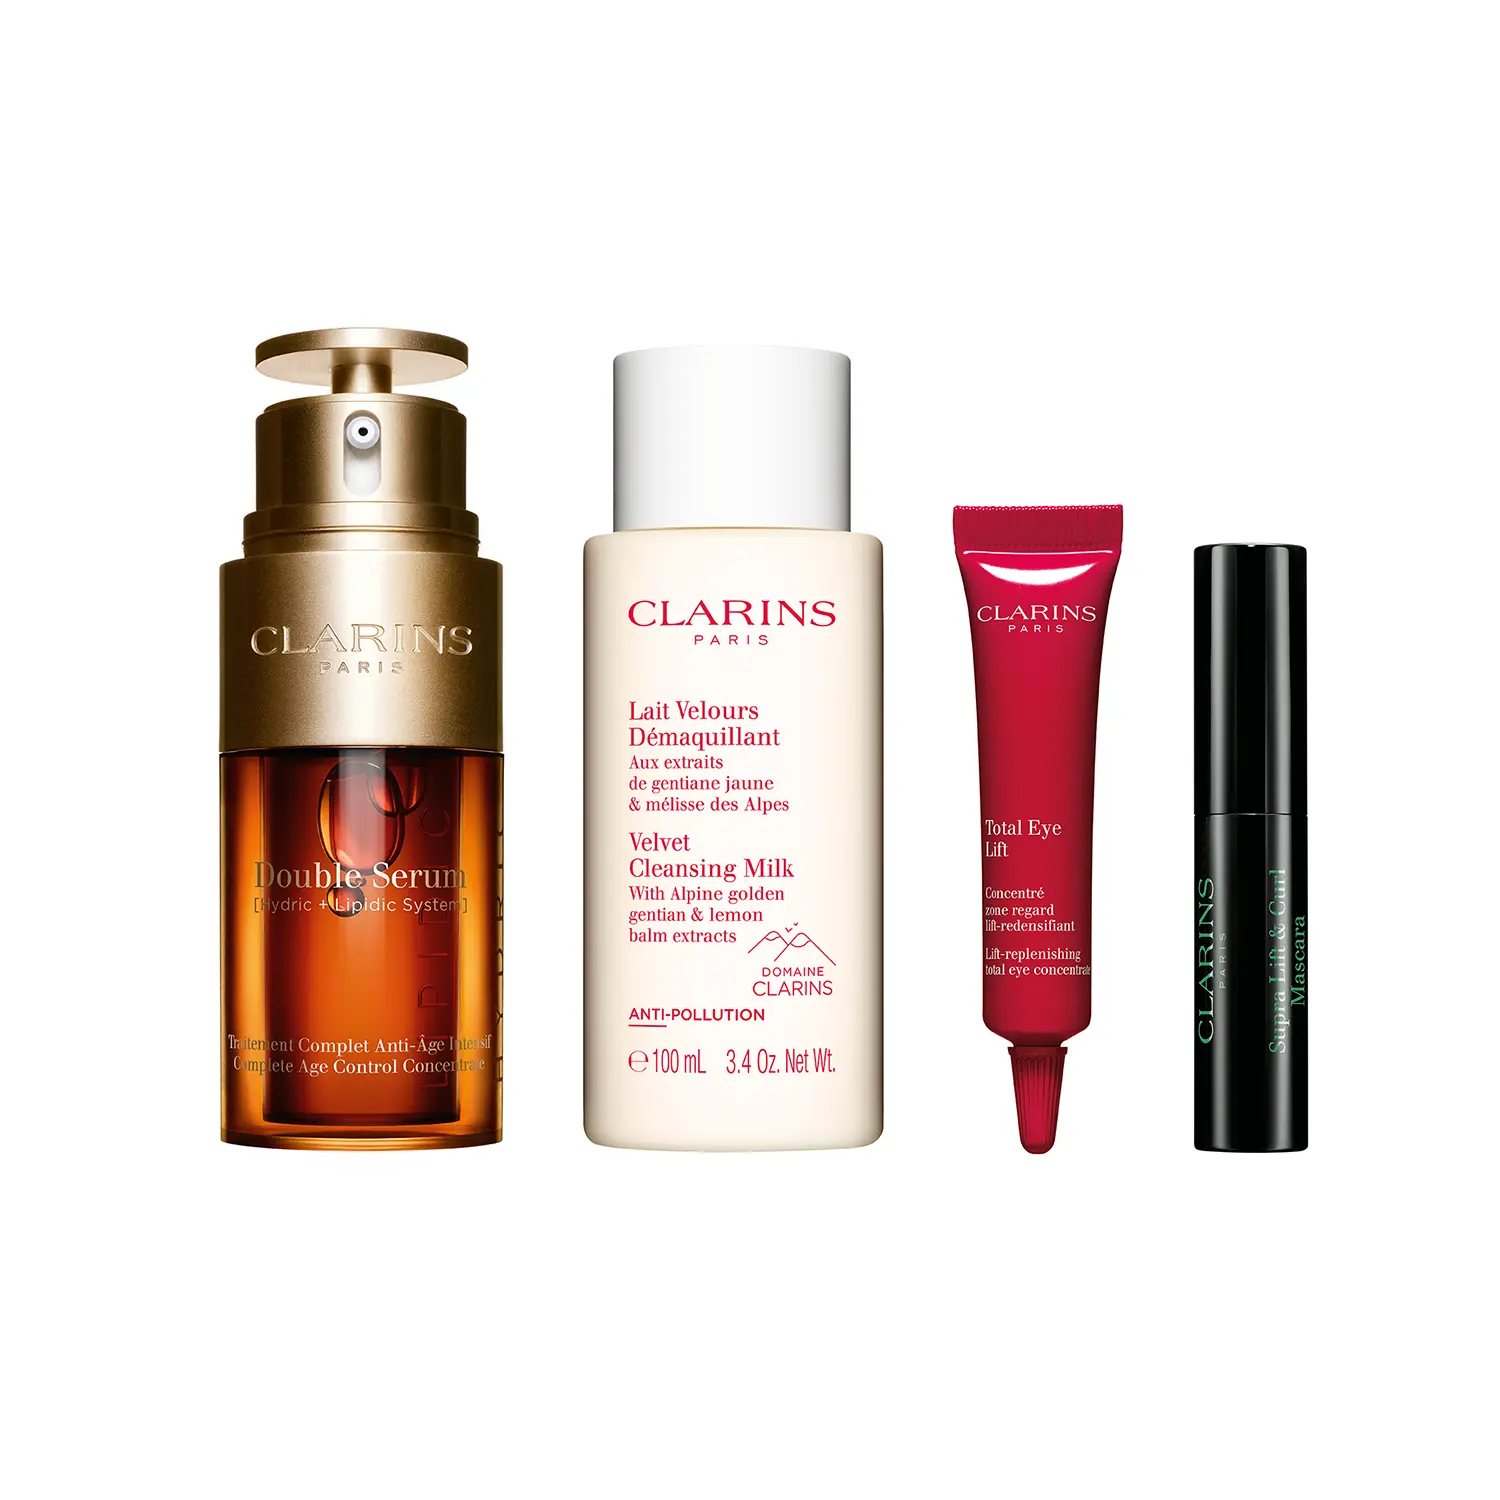 Clarins We Know Skin Lift & Firm Kit